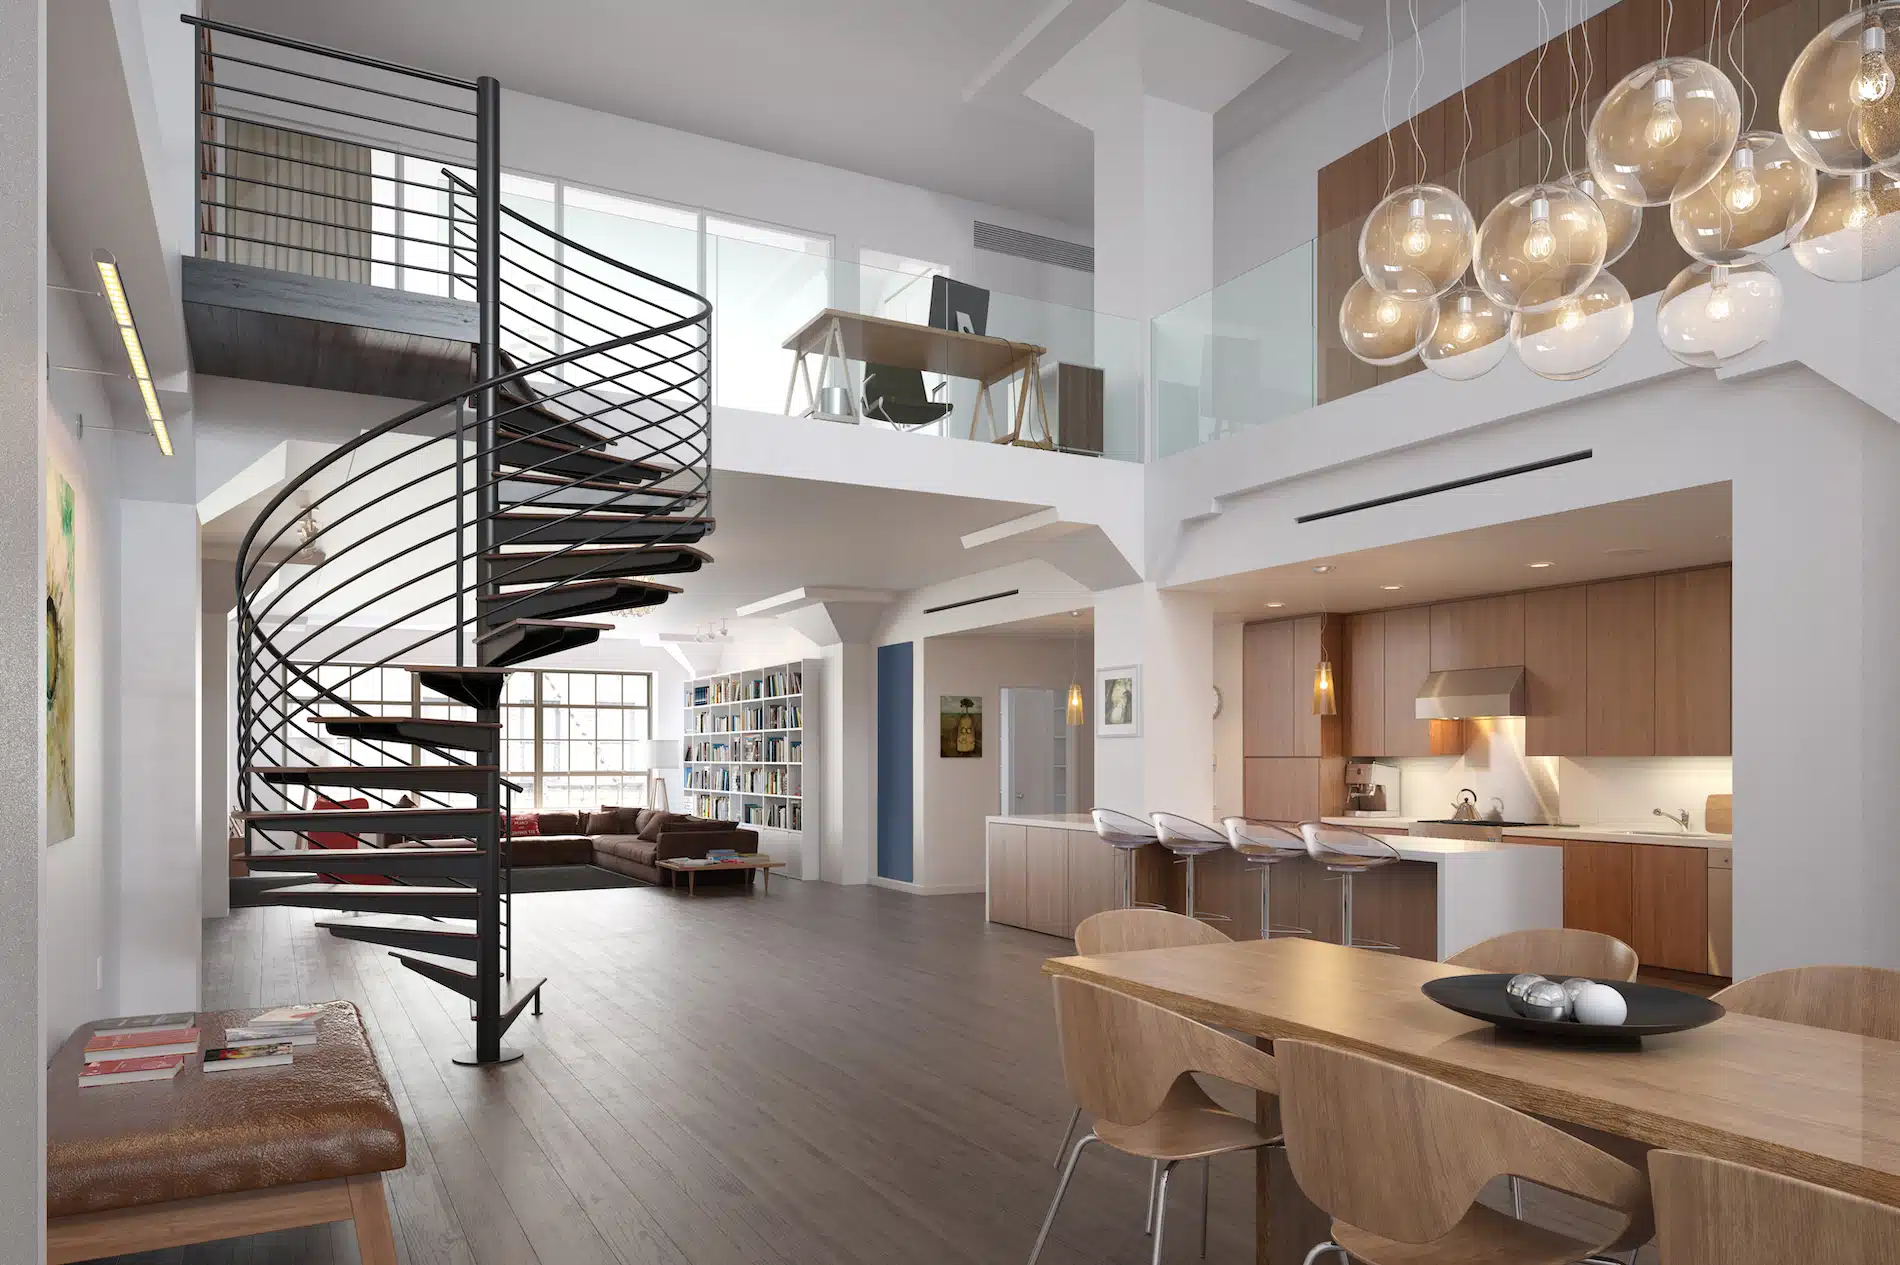 An open-concept home with furniture, a staircase, and work-oriented loft space ideas.